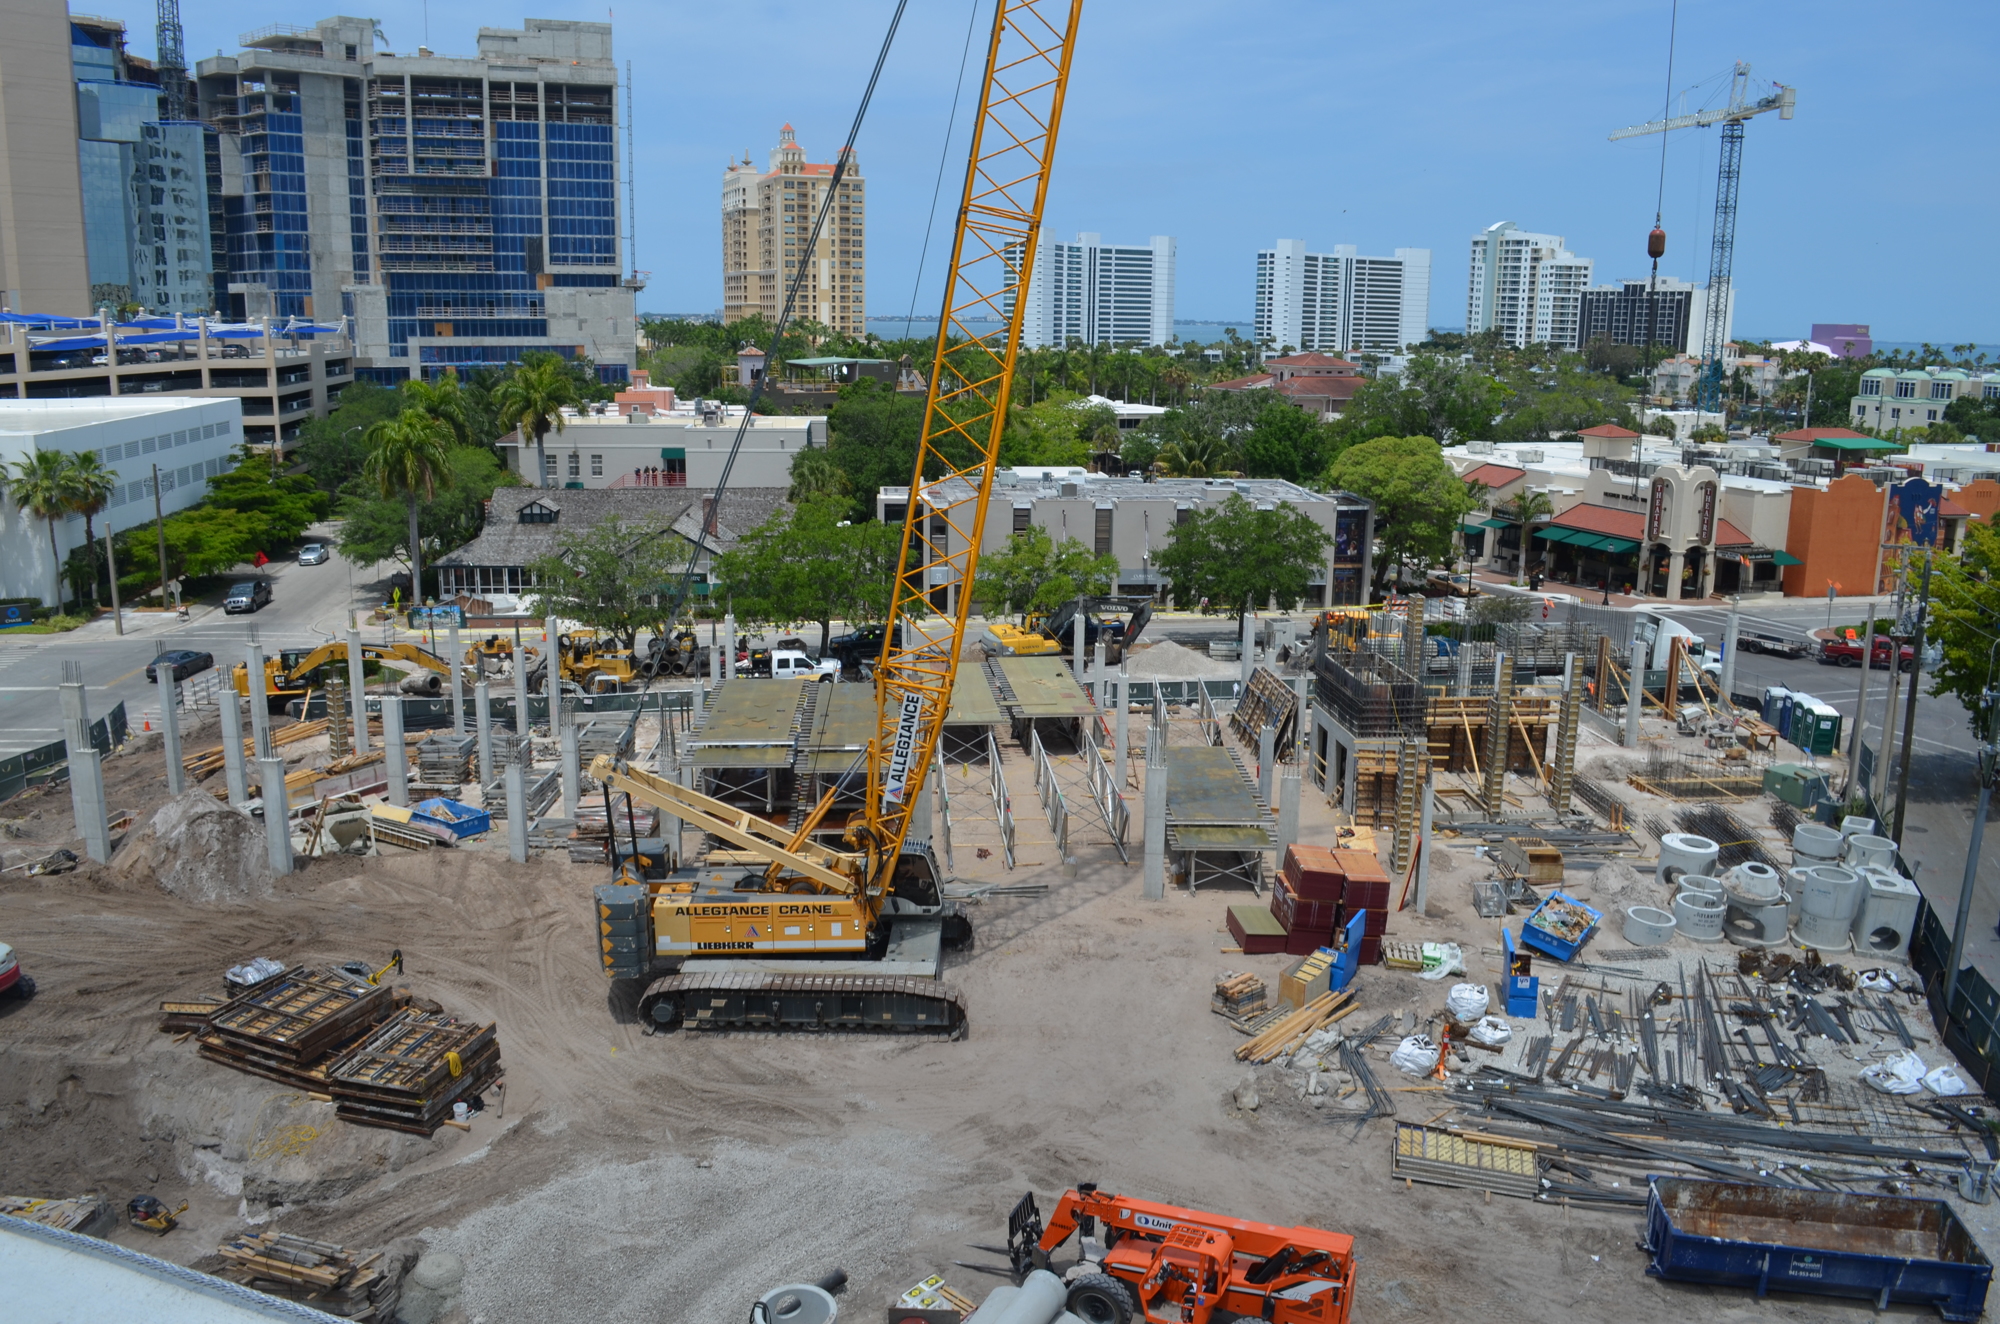 Although nothing's going to clear the cranes and cars from downtown Sarasota this season, officials are tasked with making key decisions regarding new building and traffic.